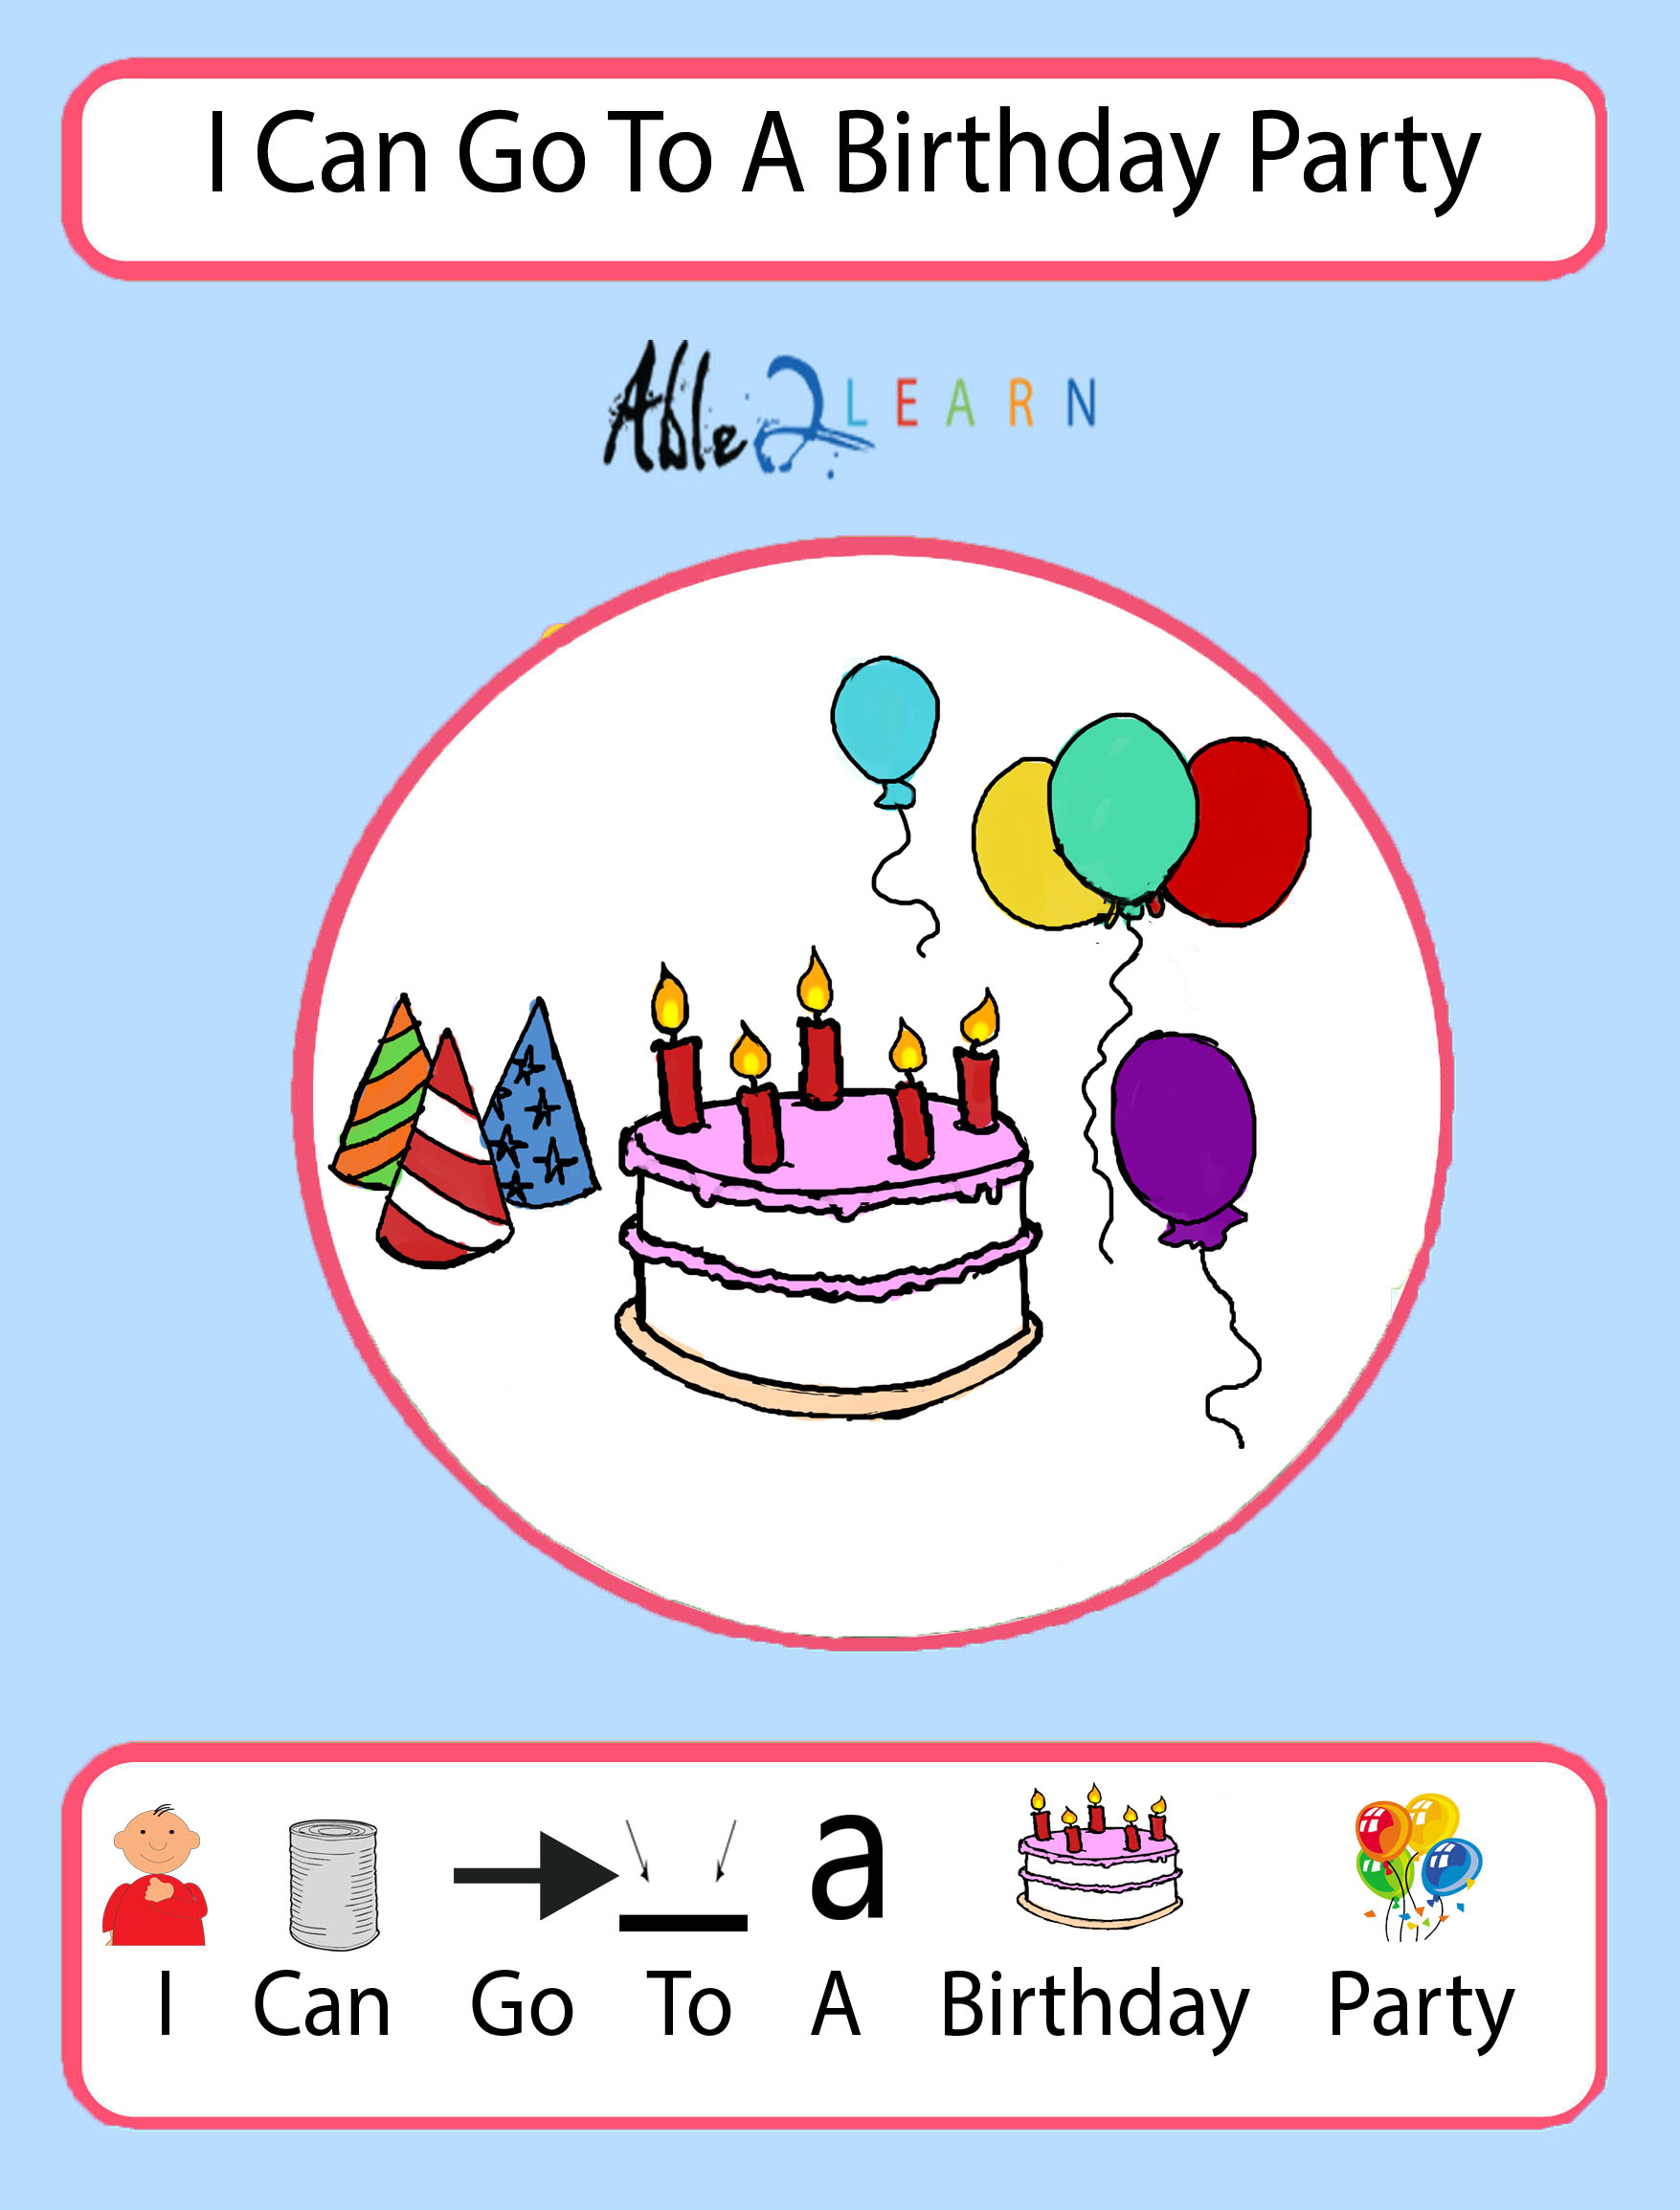 i-am-going-to-a-birthday-party-social-story-social-story-free-social-stories-free-aba-resources-free-printable-worksheets-pre-k-life-skills-3.jpg